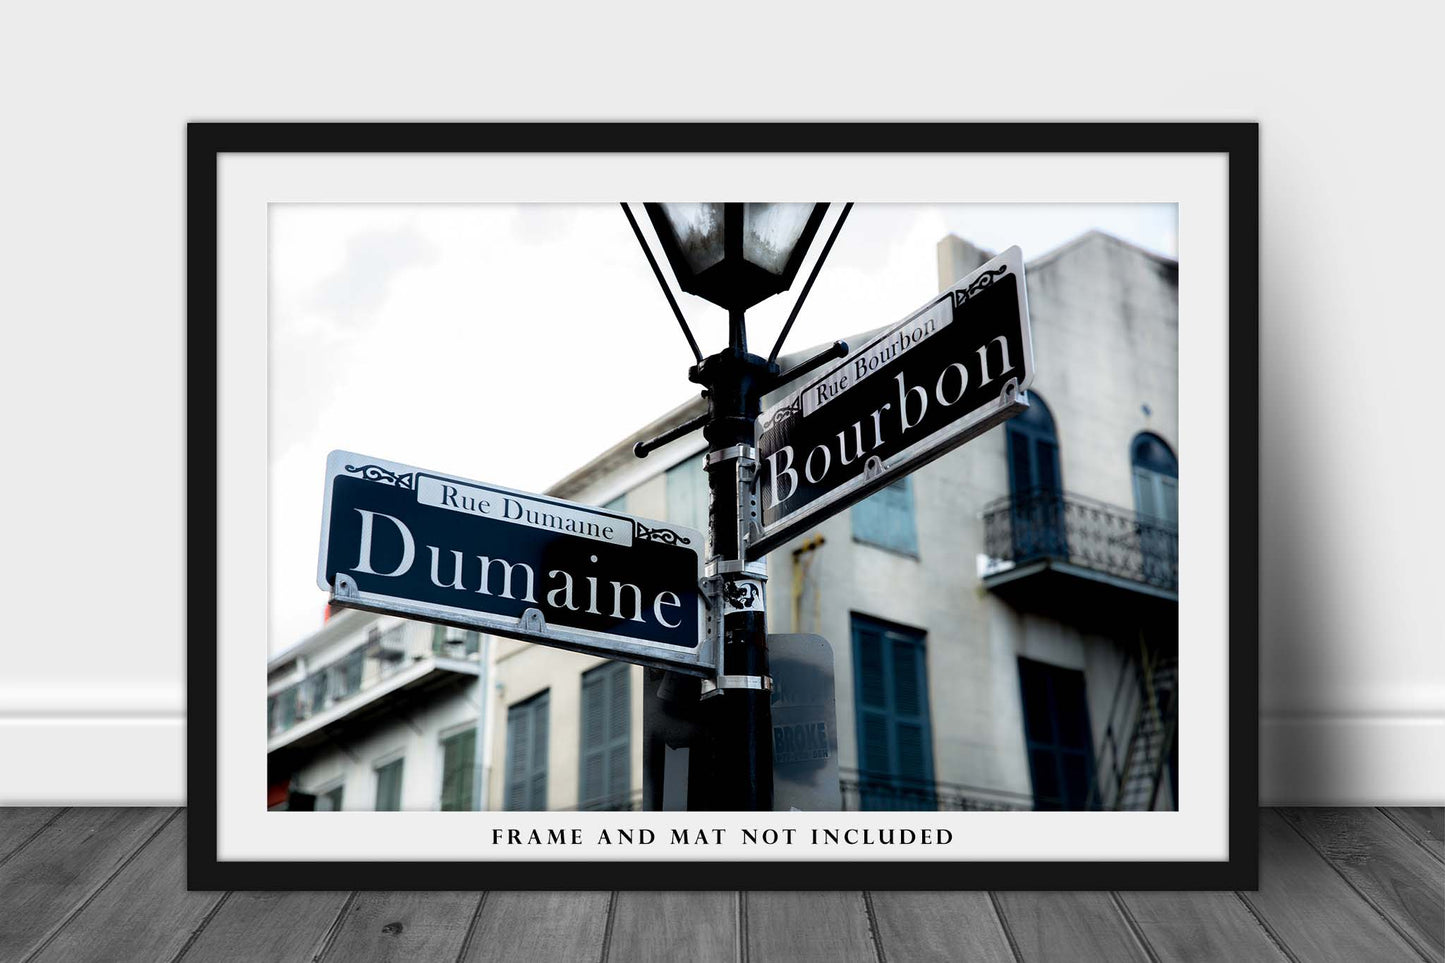 NOLA Photography Print (Not Framed) Picture of Street Signs at Intersection of Dumaine and Bourbon Street in New Orleans Louisiana Wall Art French Quarter Decor